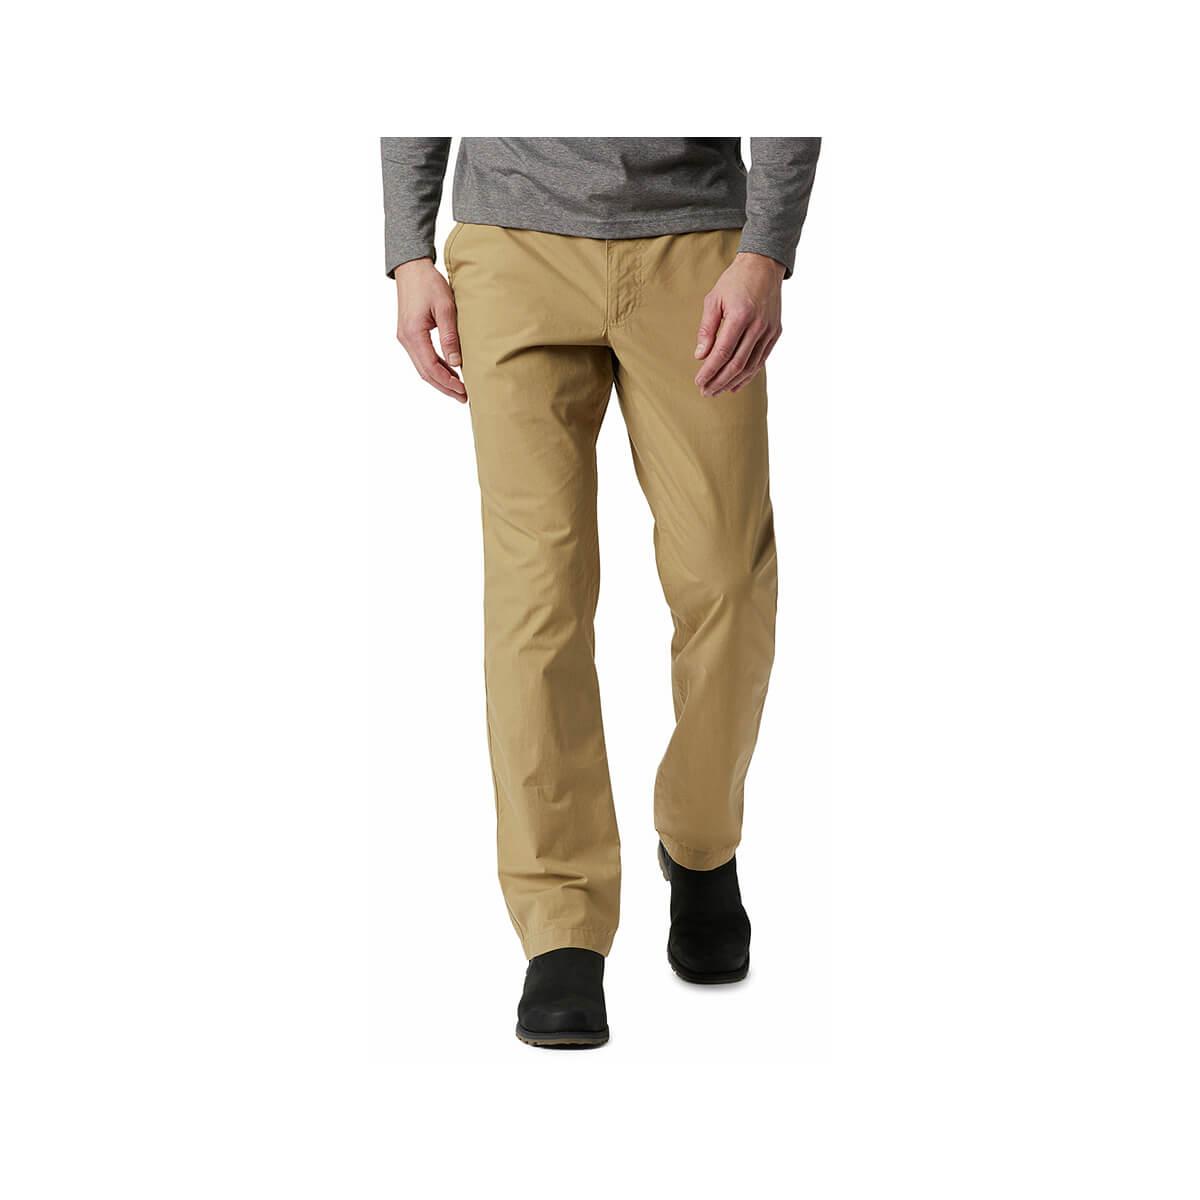  Men's Washed Out Pants